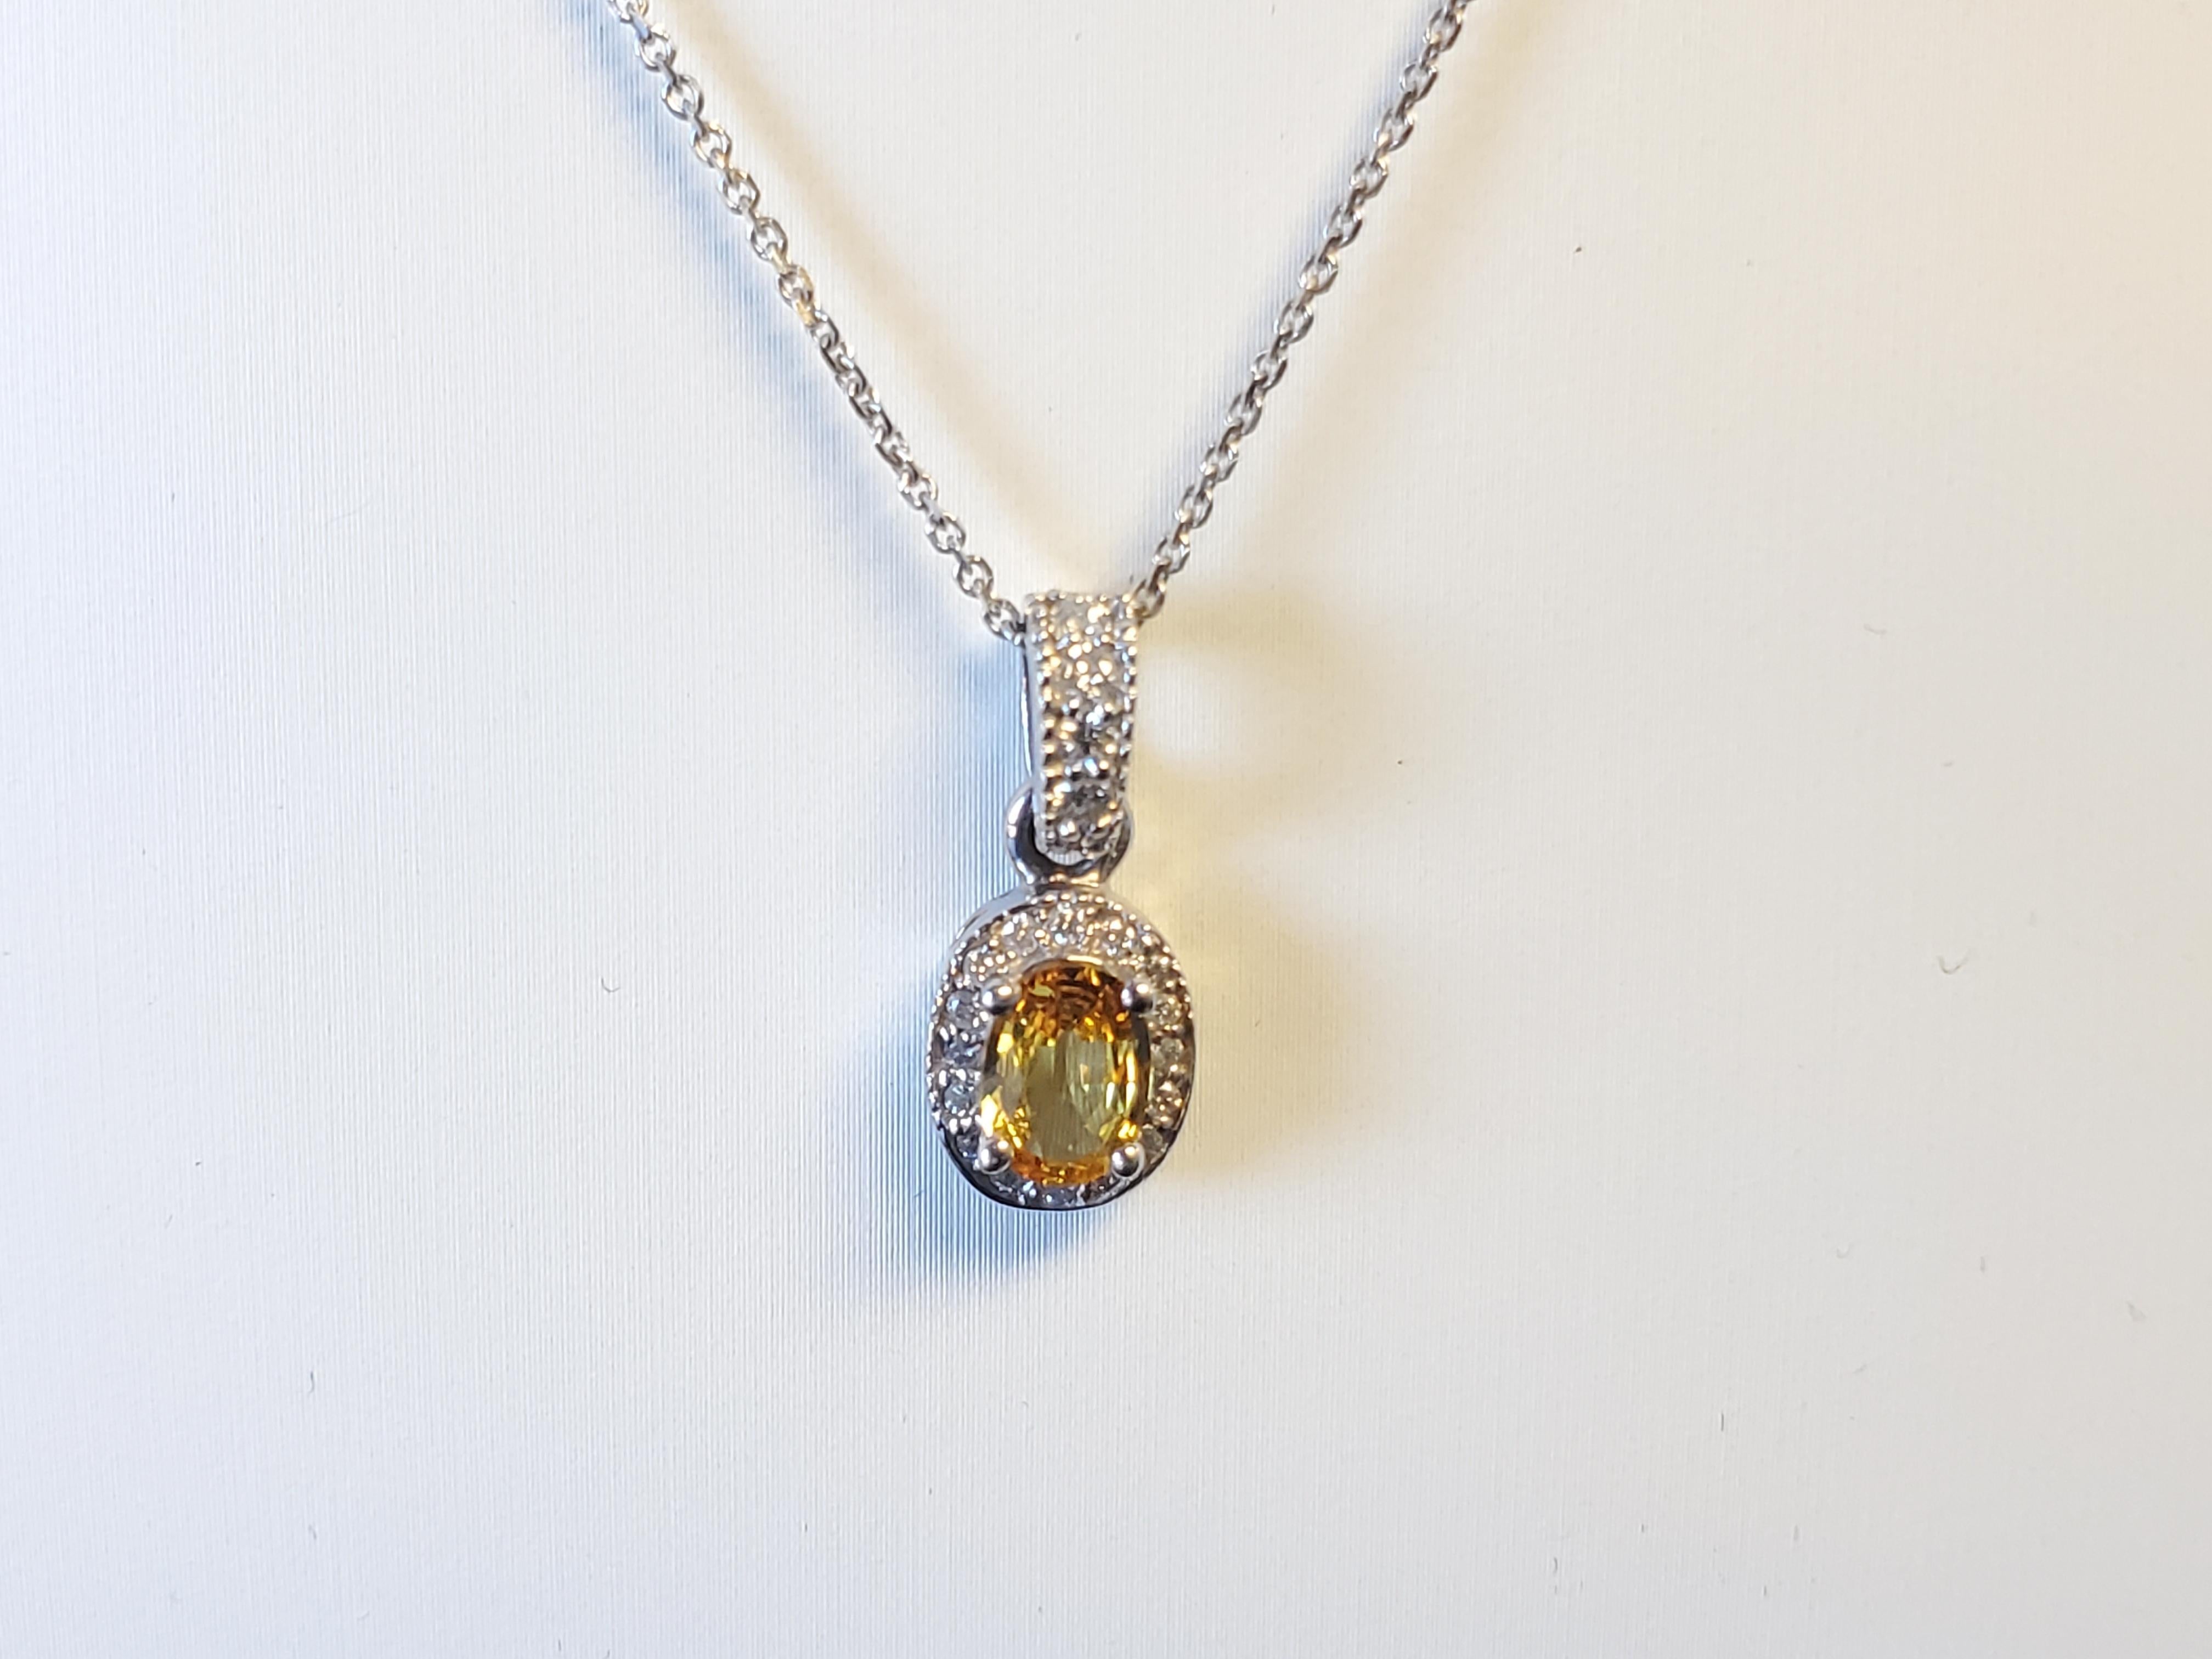 Listed is an estate 14k white gold oval sapphire and diamond necklace. The piece is in great condition and ready to be shown off. The necklace features a nice clean oval yellow sapphire 7x5mm around 1ct with .24tcw G-H I1 quality round brilliant